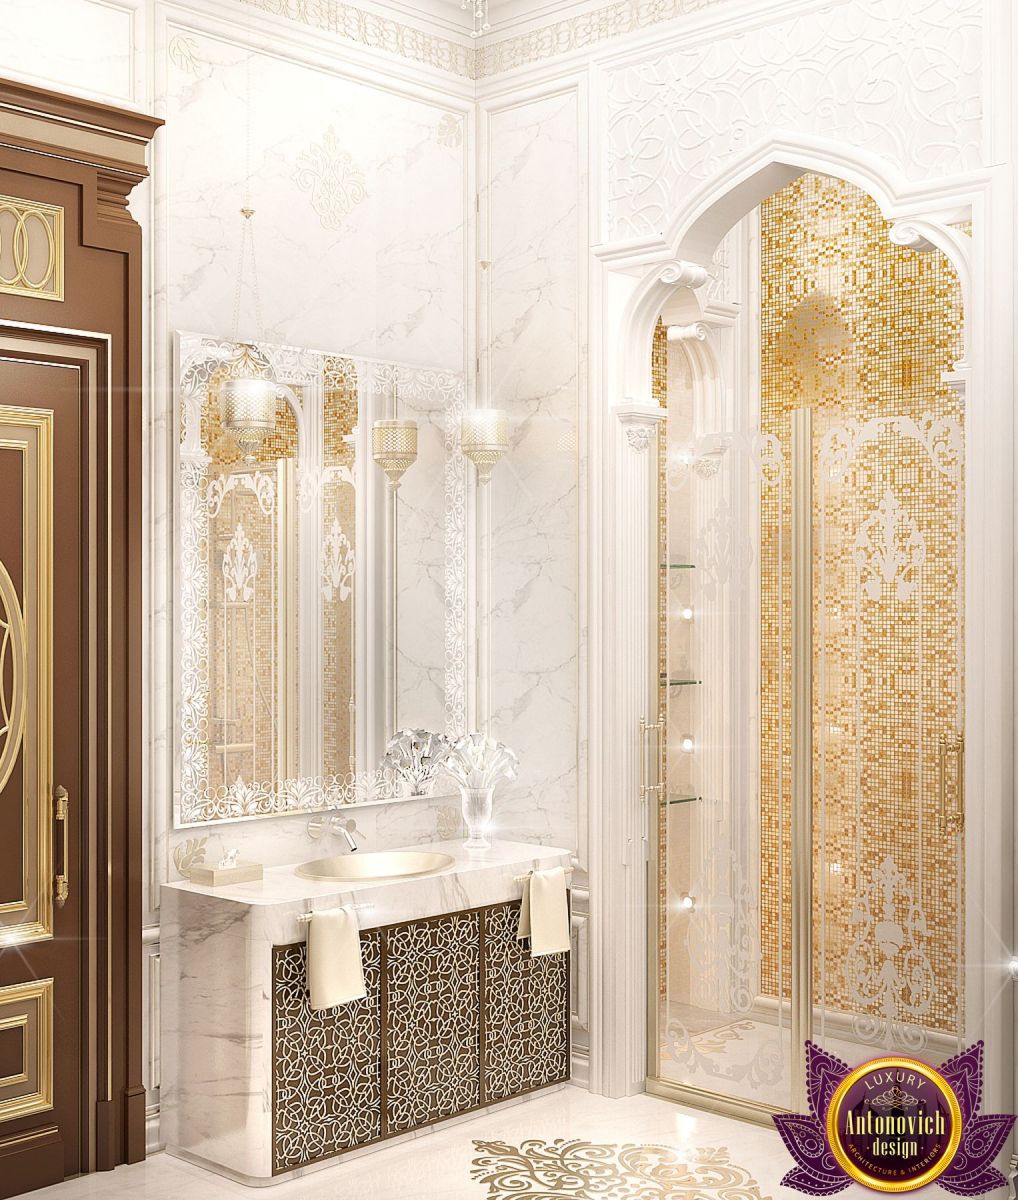 Luxurious bathroom with a statement chandelier